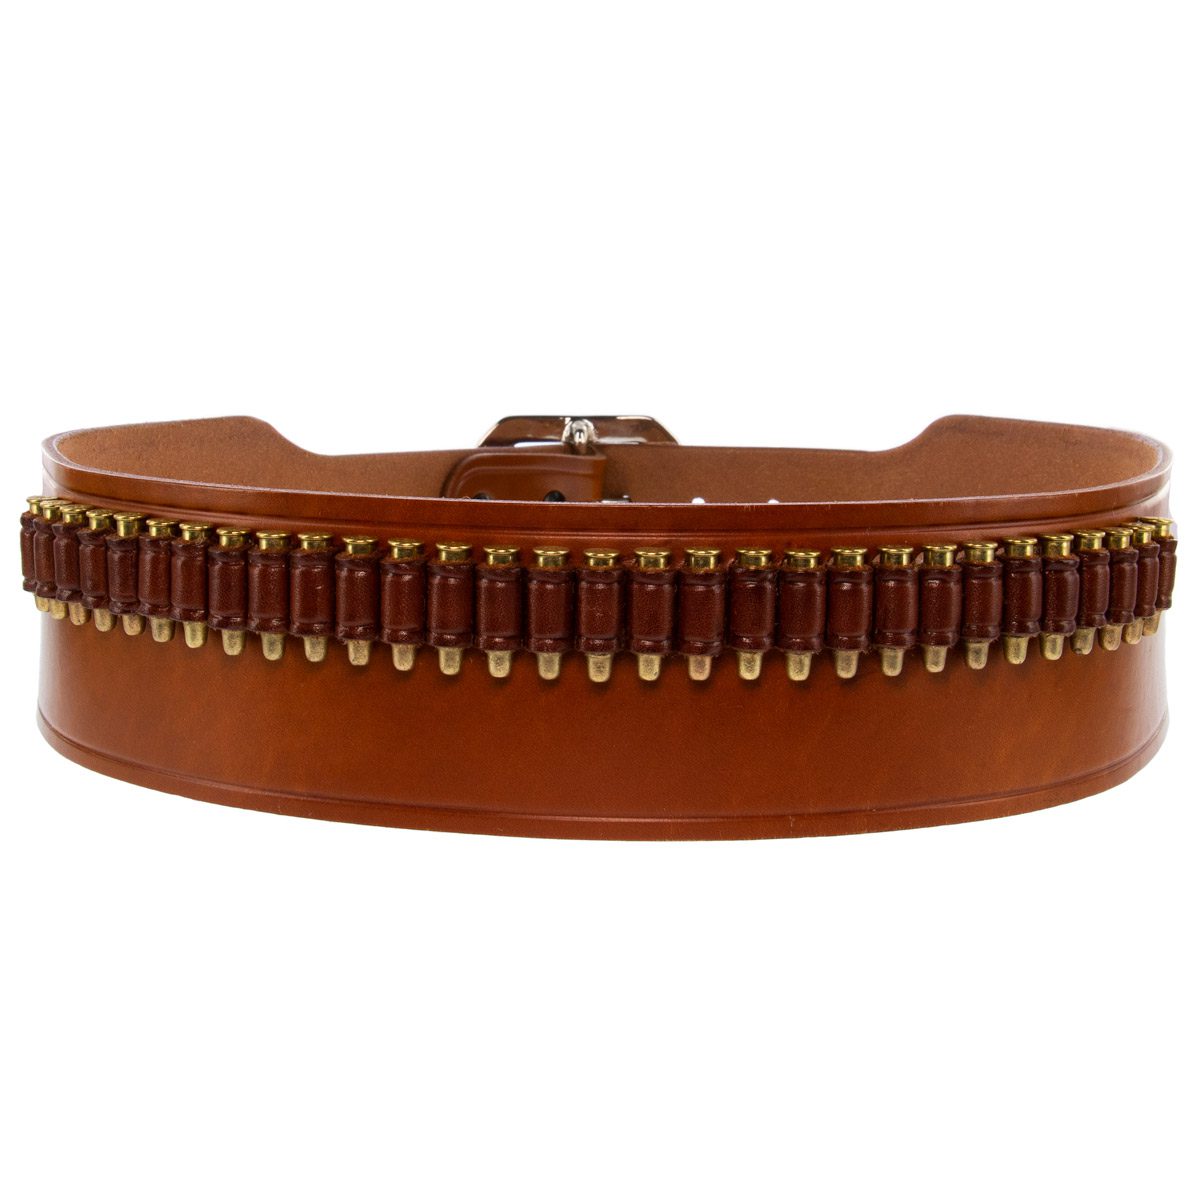 Galco Gunleather Ruger Wrangler Cartridge Belt WR22 - Clothing & Accessories